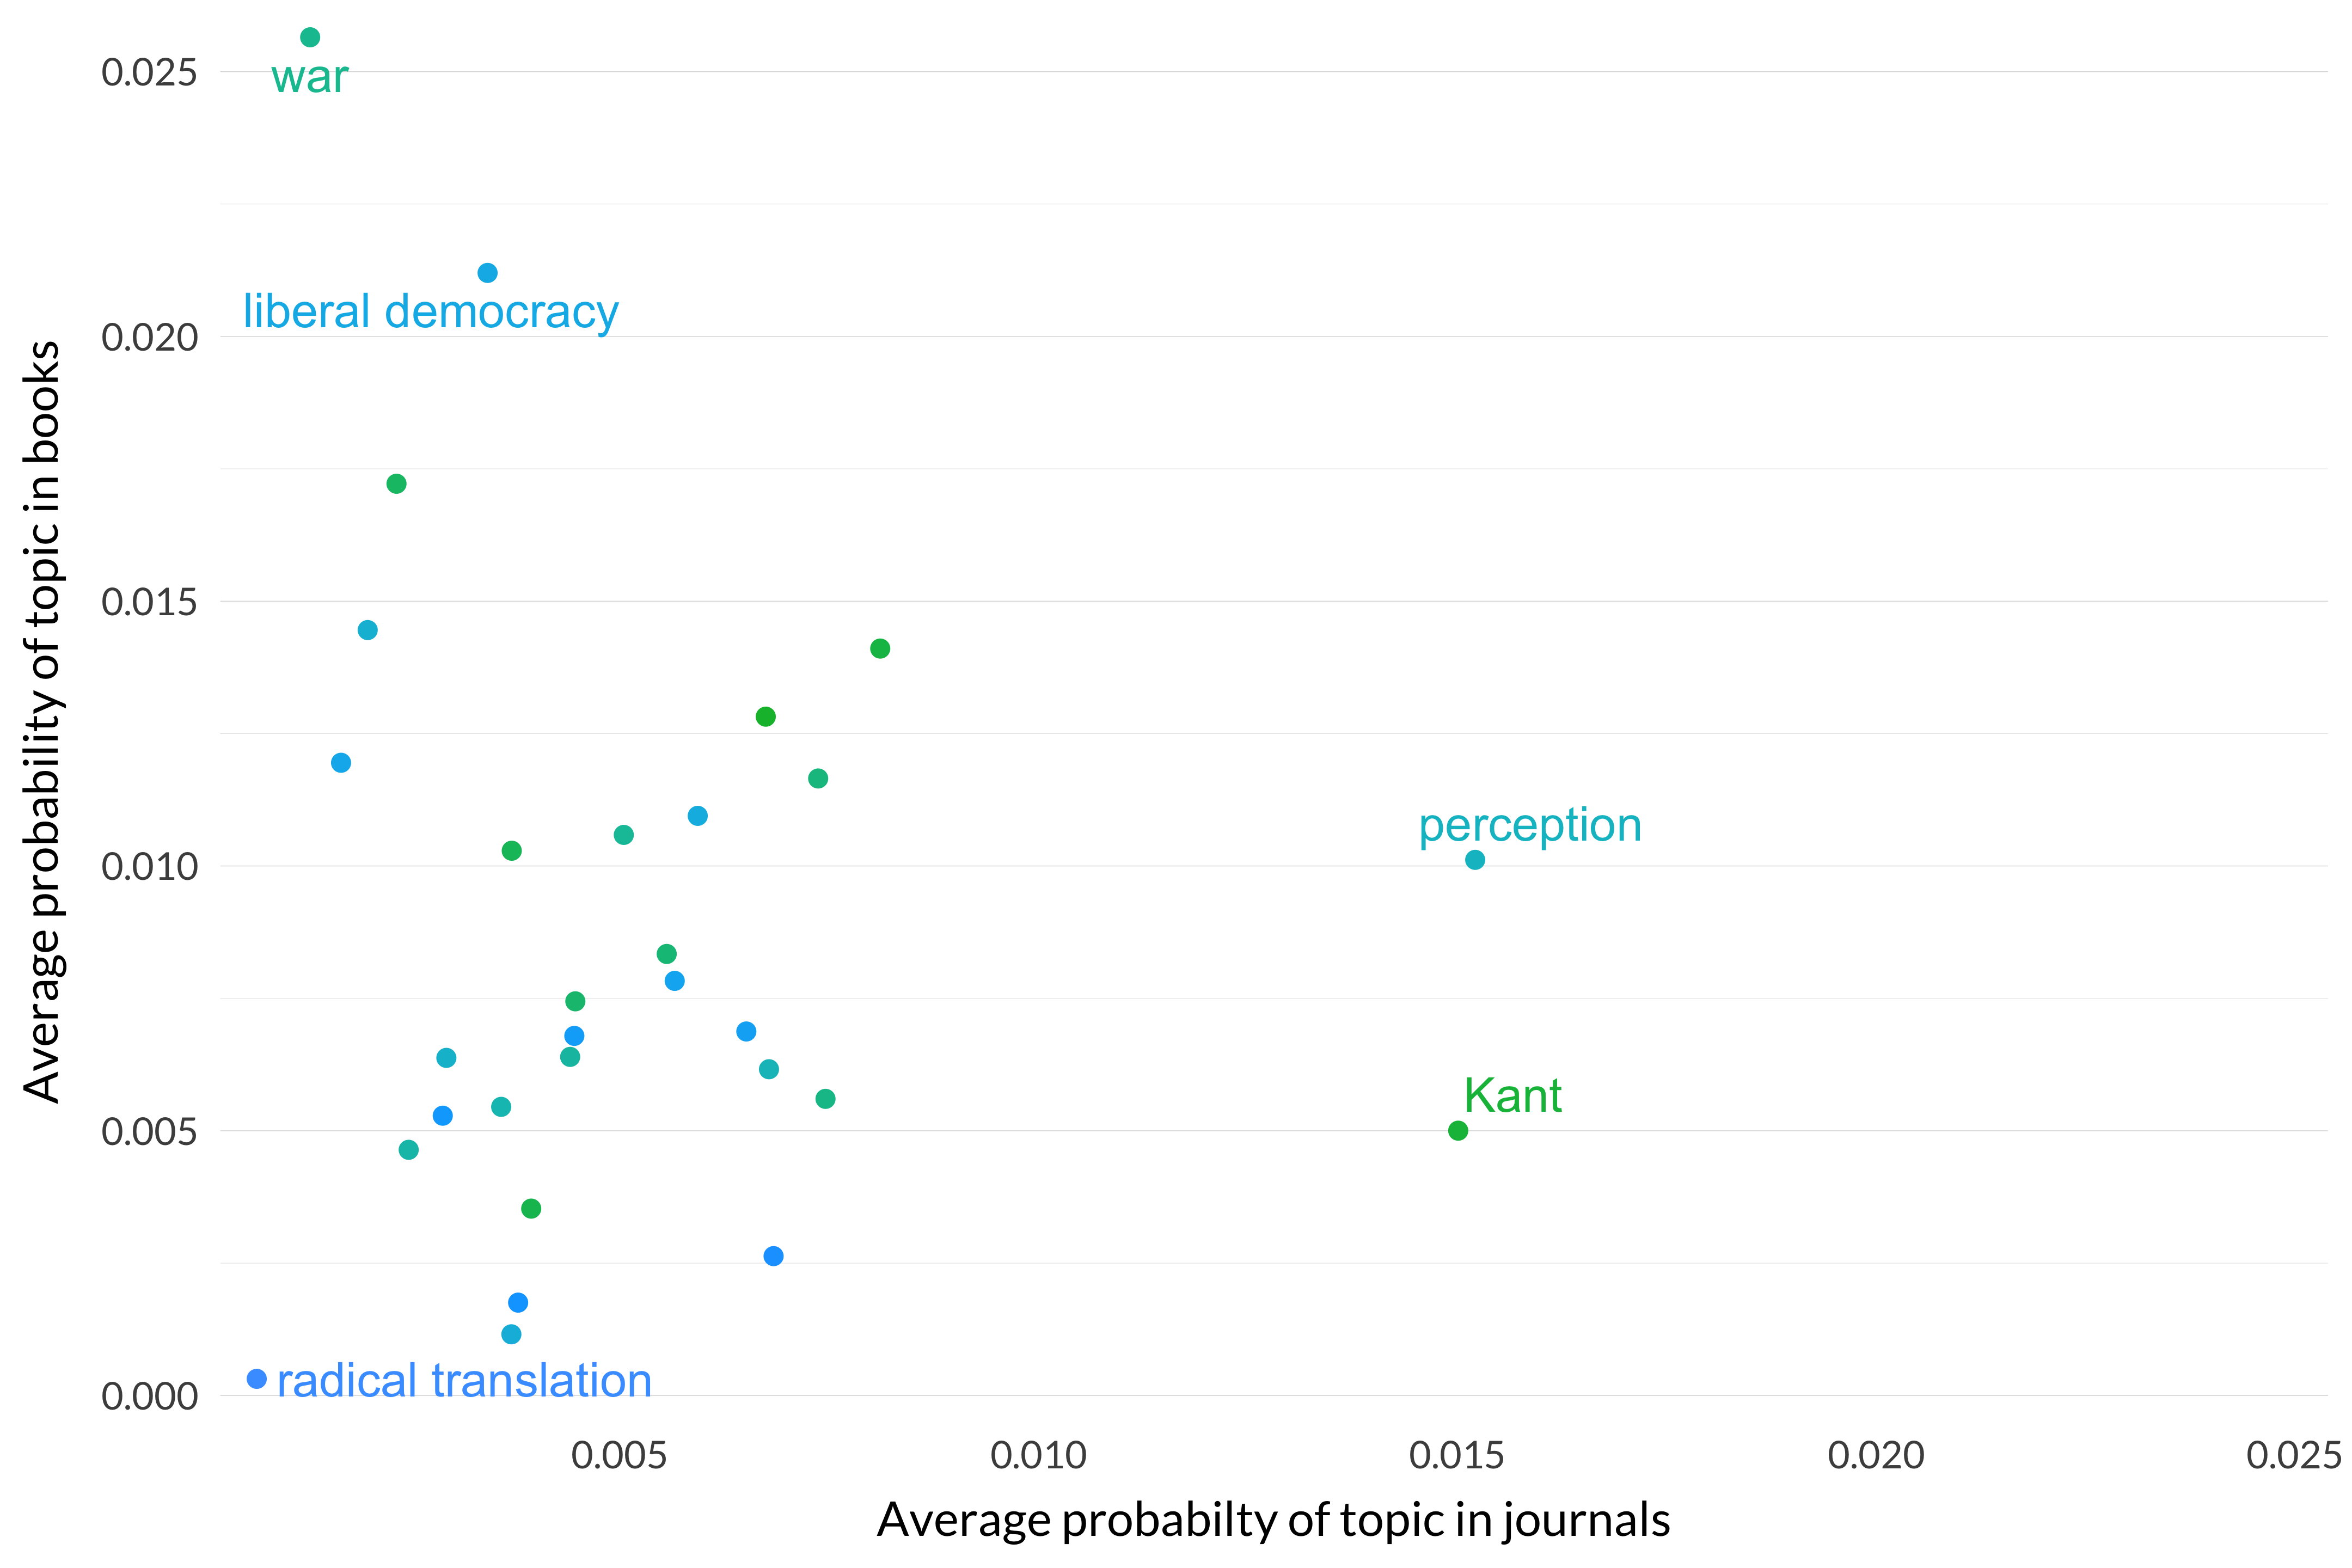 A scatterplot comparing the average probability distribution of topics 31-60 in journal articles up to 1925 and in the books being discussed. War and liberal democracy are much more prevalent in books, and perception and Kant are more prevalent in journals. Otherwise, most topics are present roughly the same.